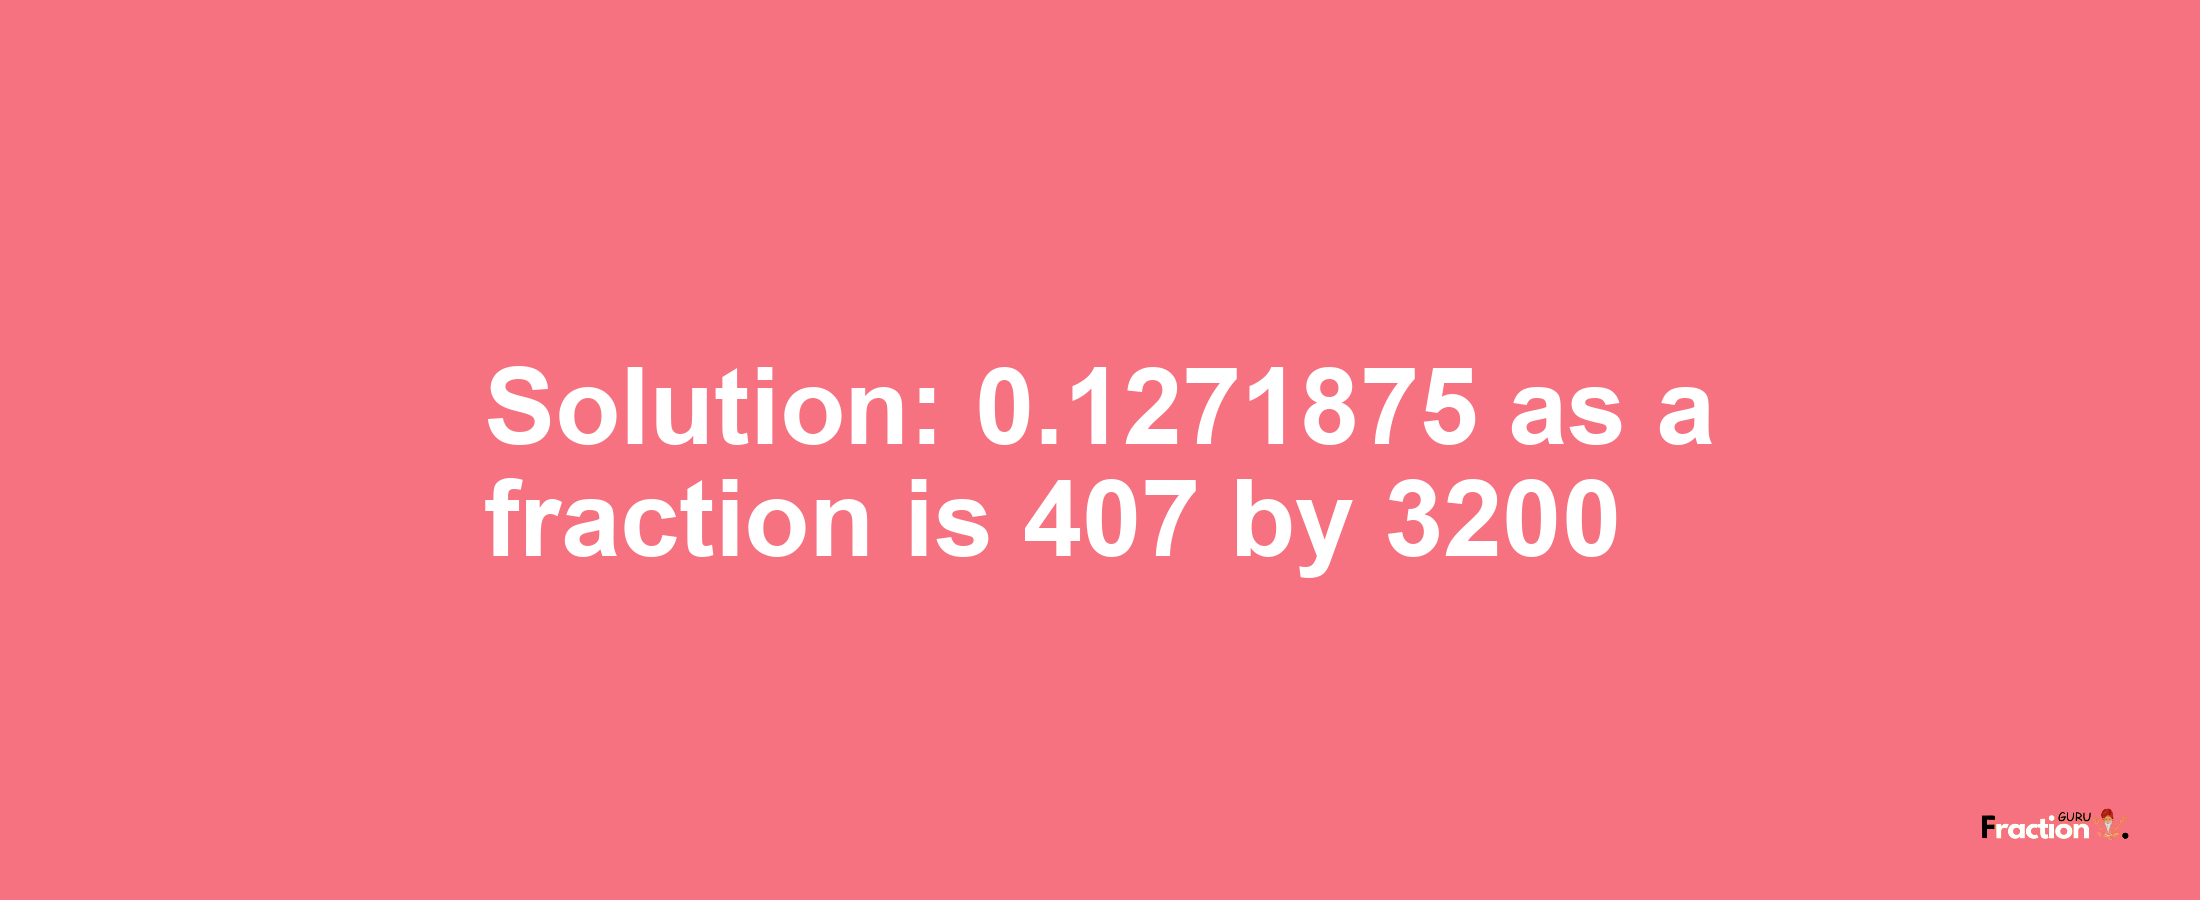 Solution:0.1271875 as a fraction is 407/3200